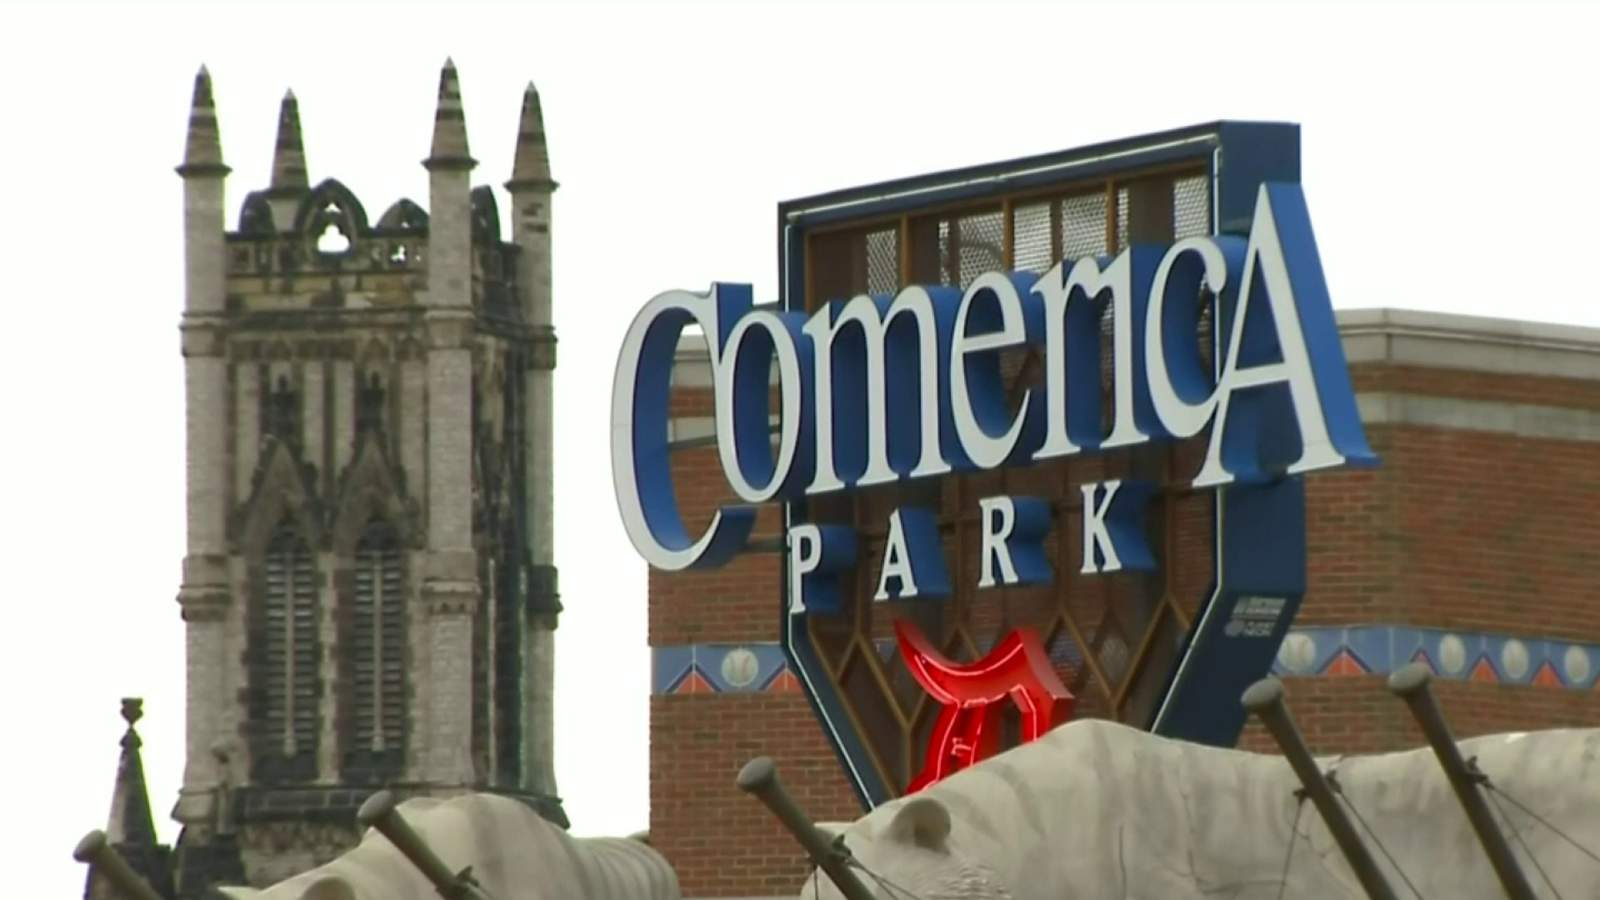 City of Detroit to enforce pandemic restrictions on Opening Day